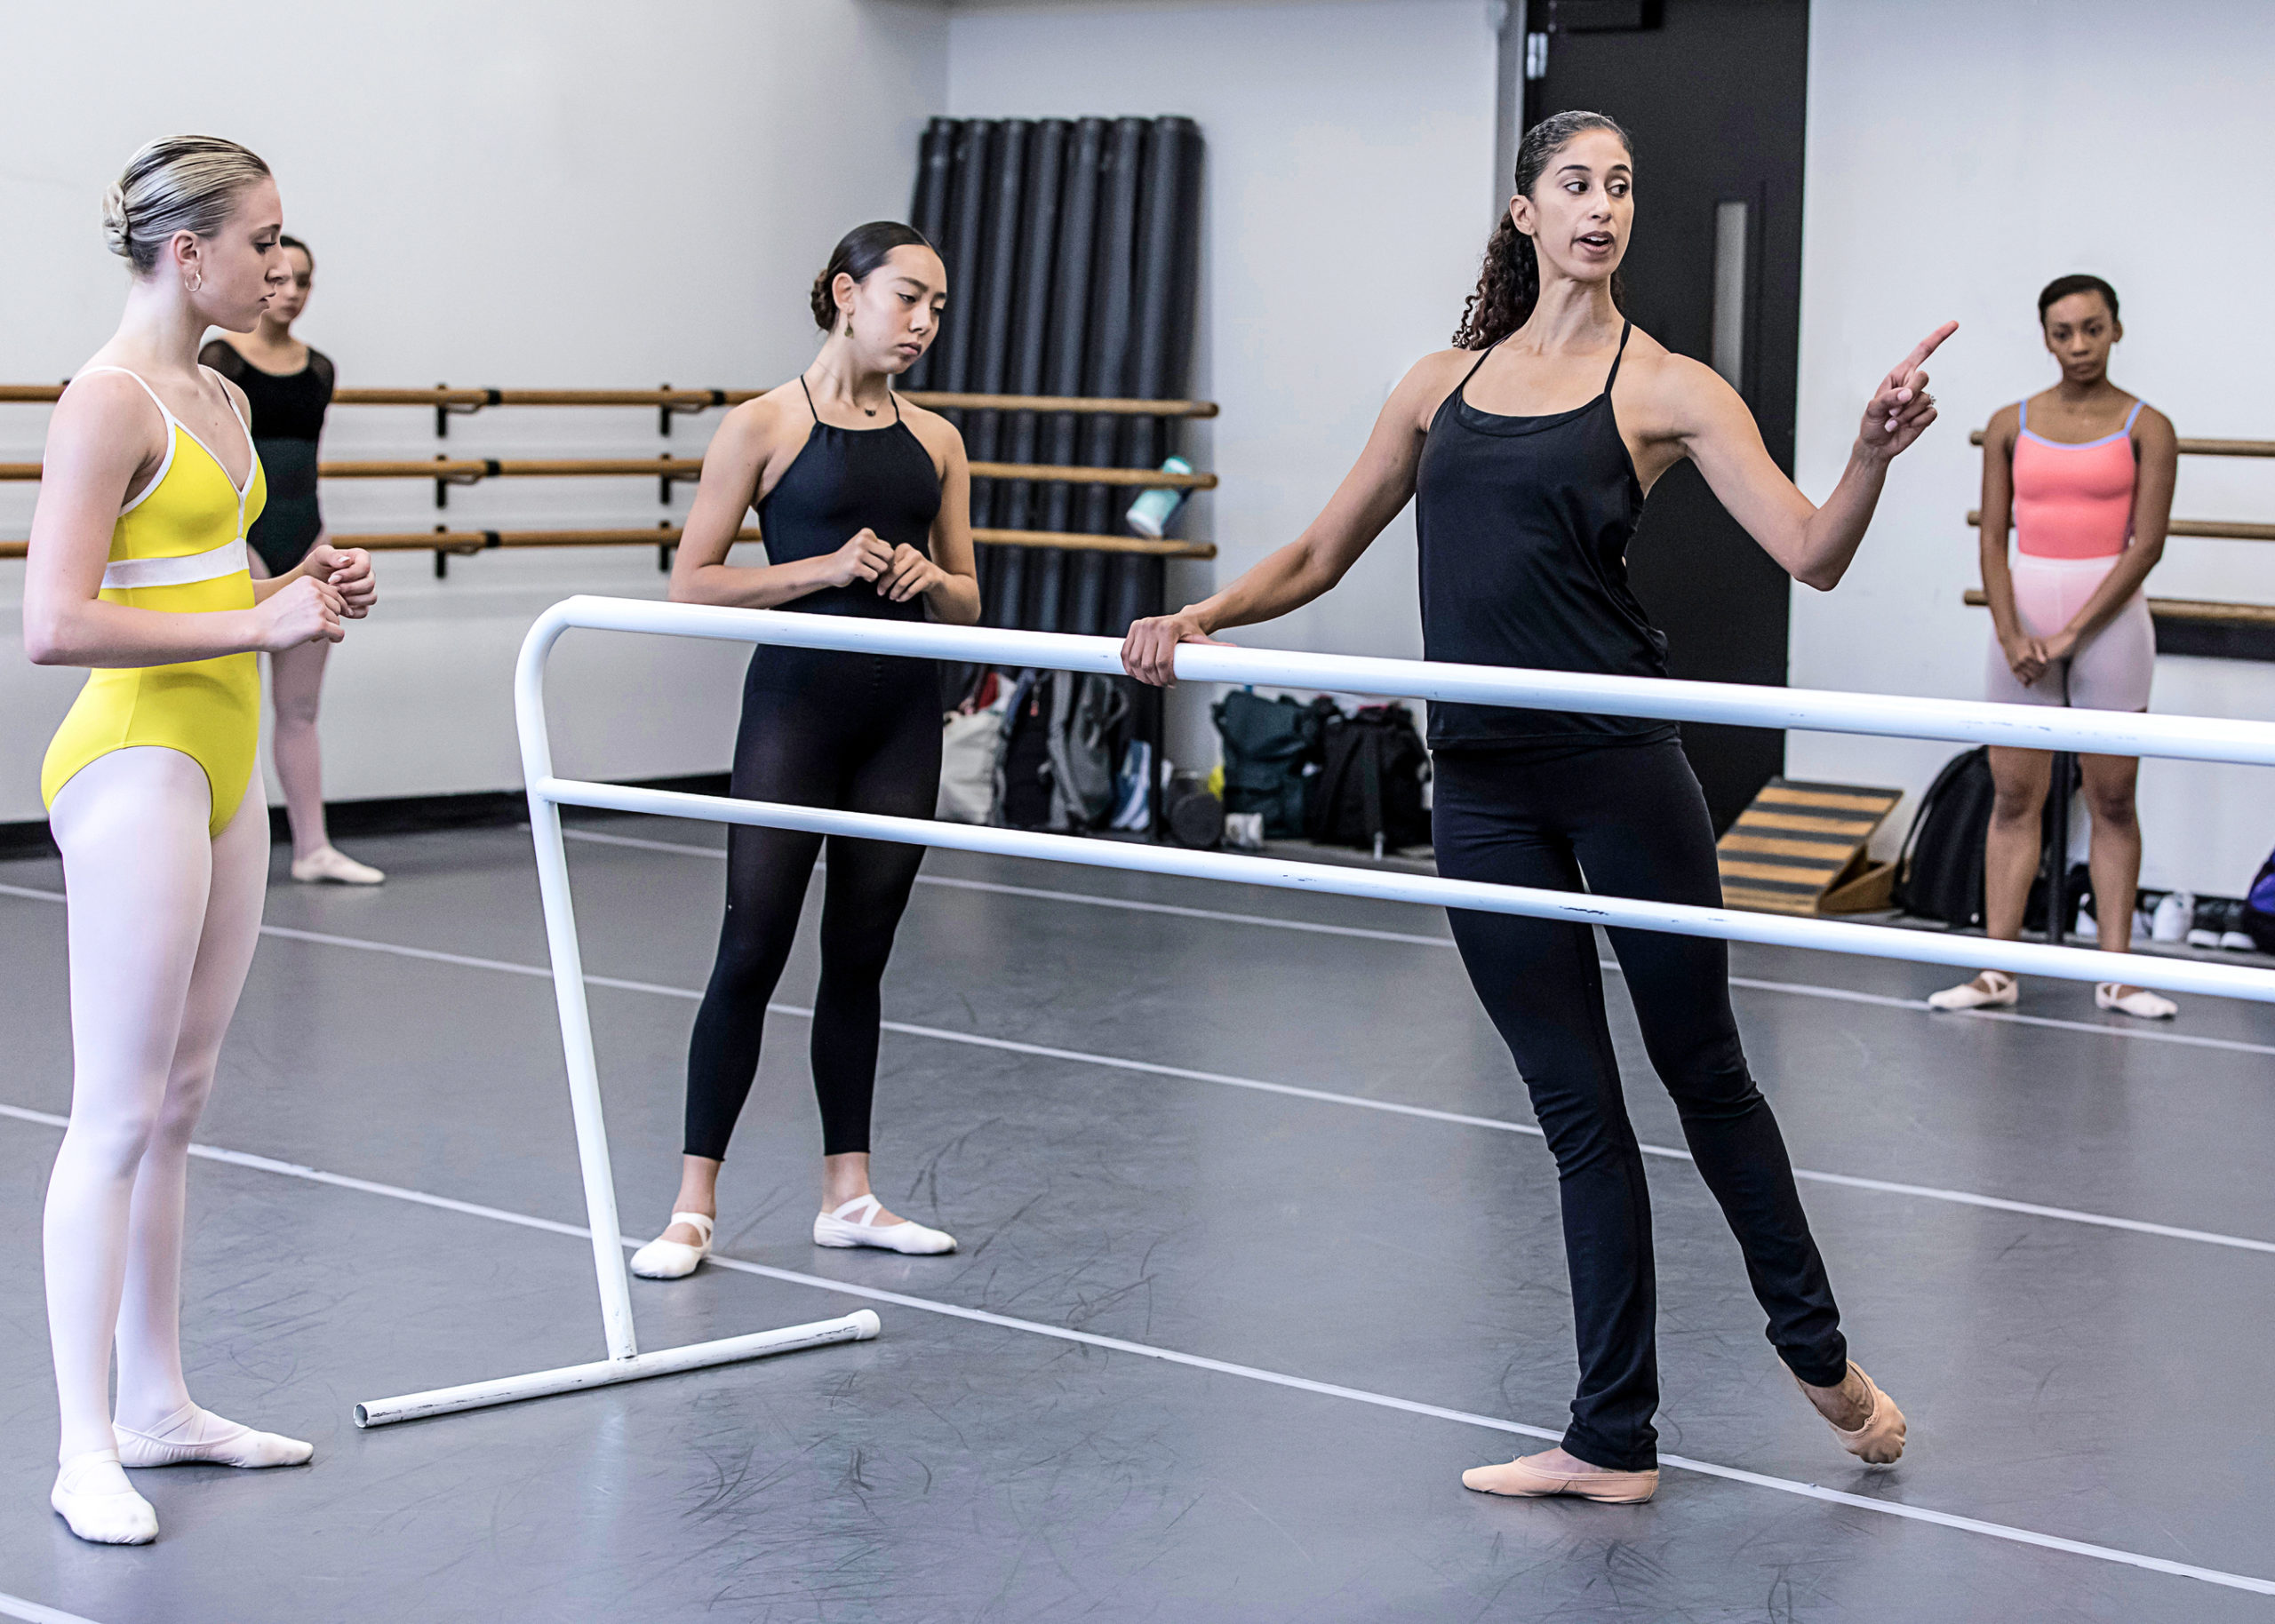 Alicia Graf Mack instructing a group of ballet students at the barre